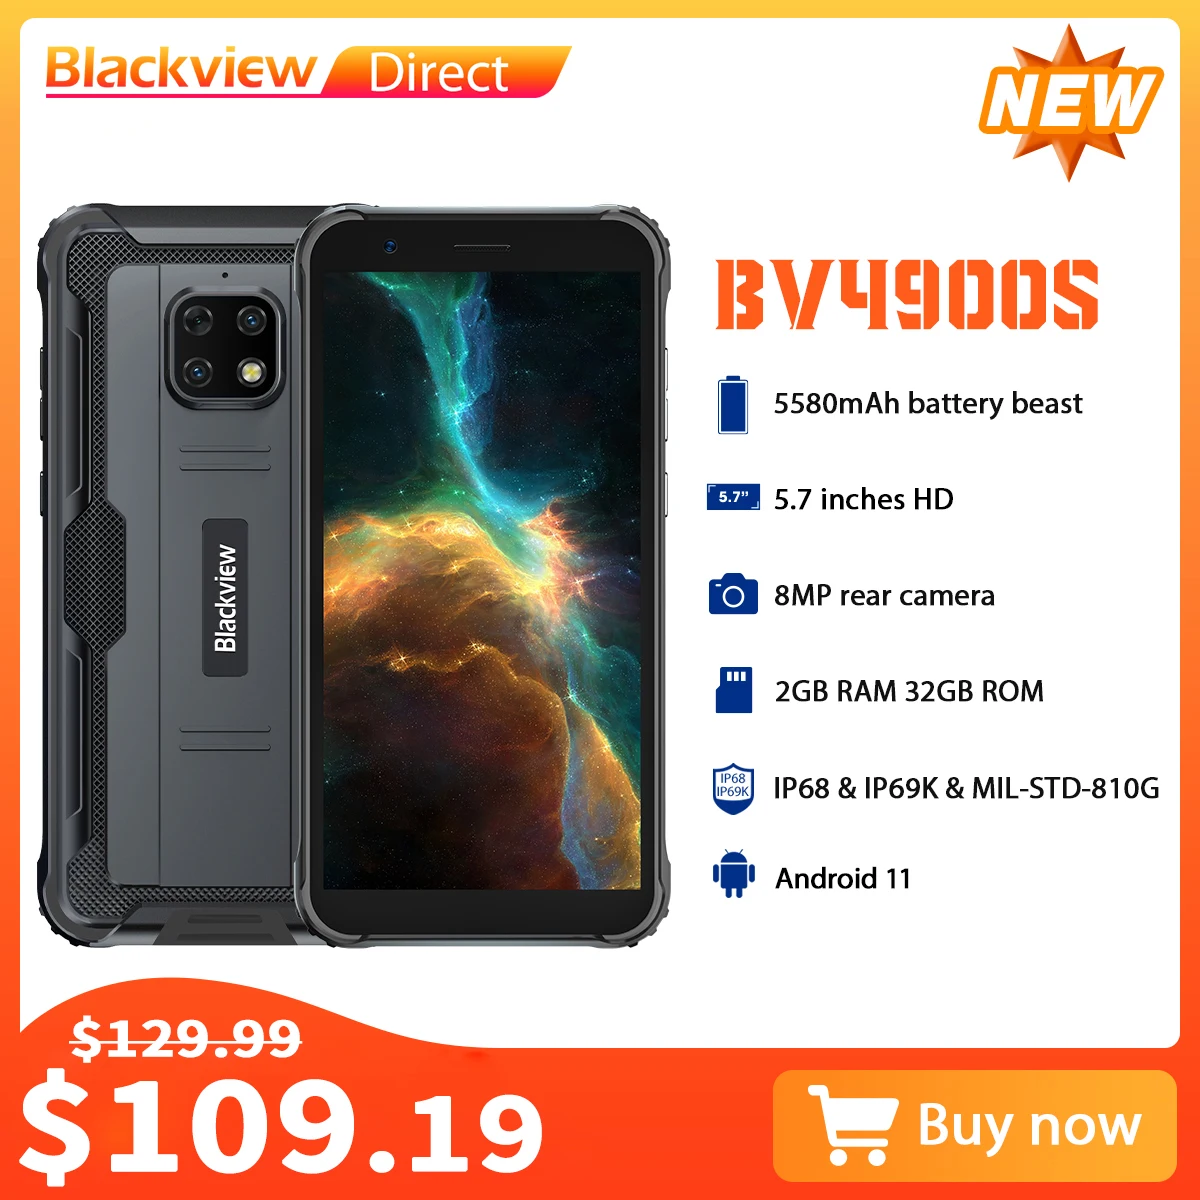 Blackview BV4900S Smartphone IP68 Rugged Waterproof Cellphones Android 11 Octa Core 2GB 32GB Mobile Phone 5580mAh 5.7inch Phones